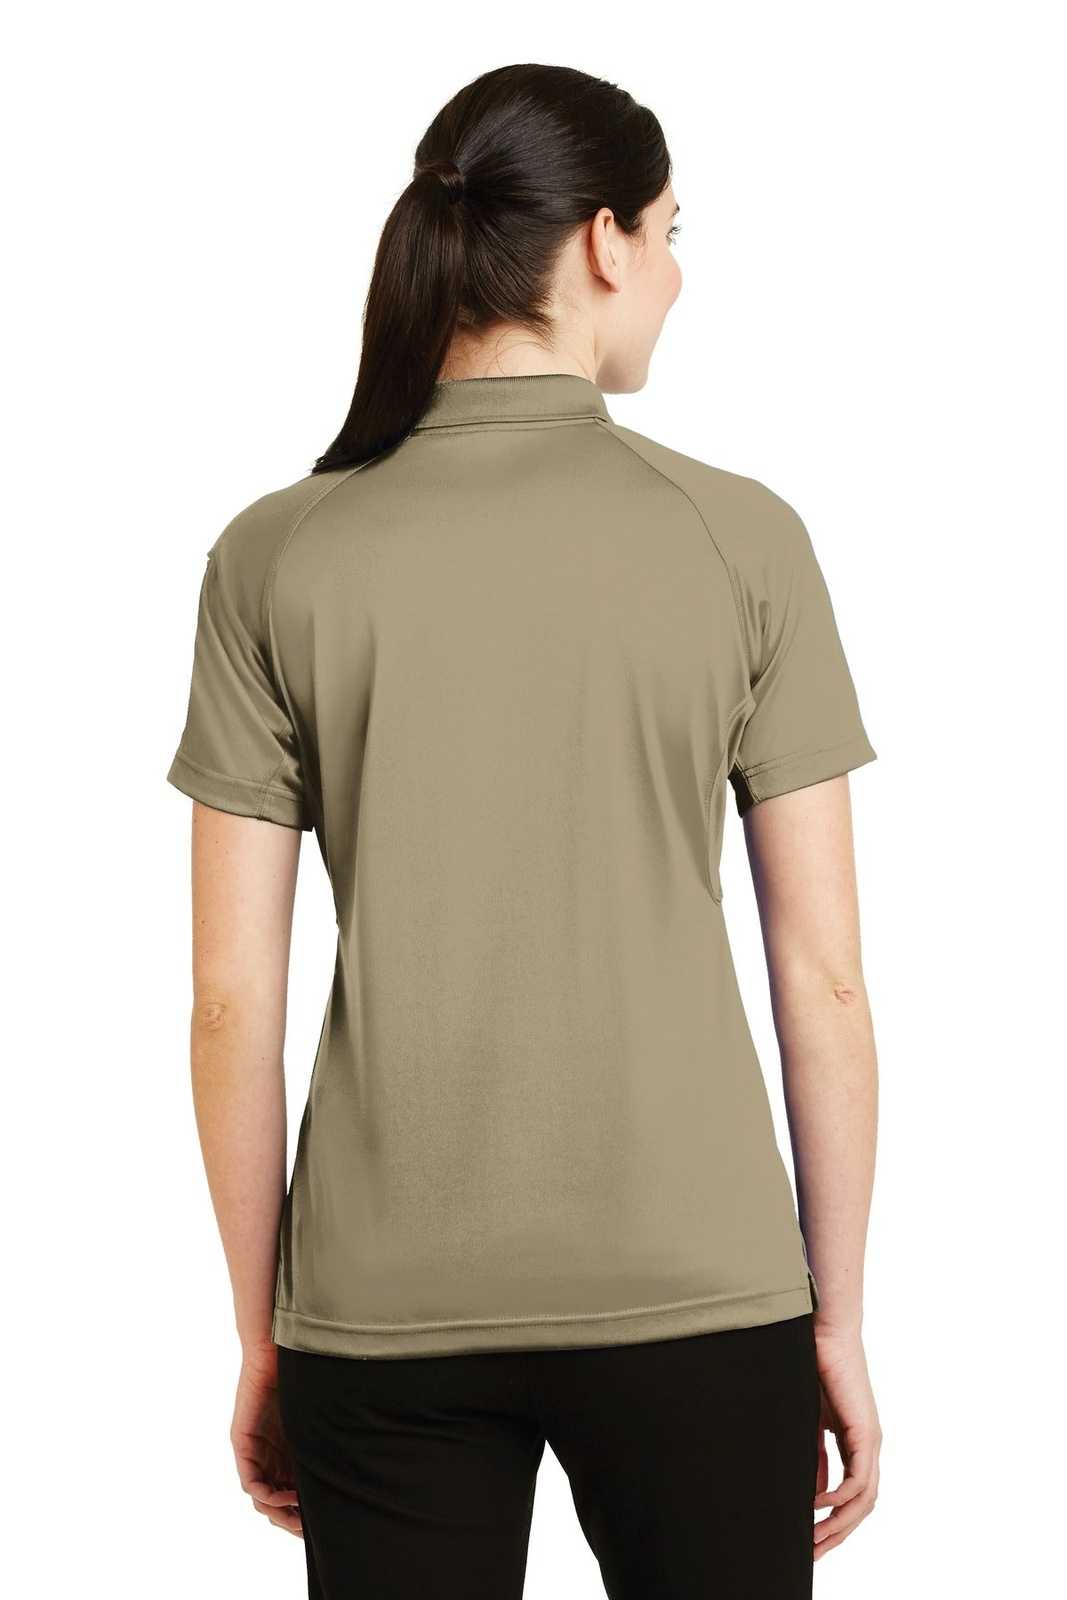 CornerStone CS411 Ladies Select Snag-Proof Tactical Polo - Tan - HIT a Double - 1